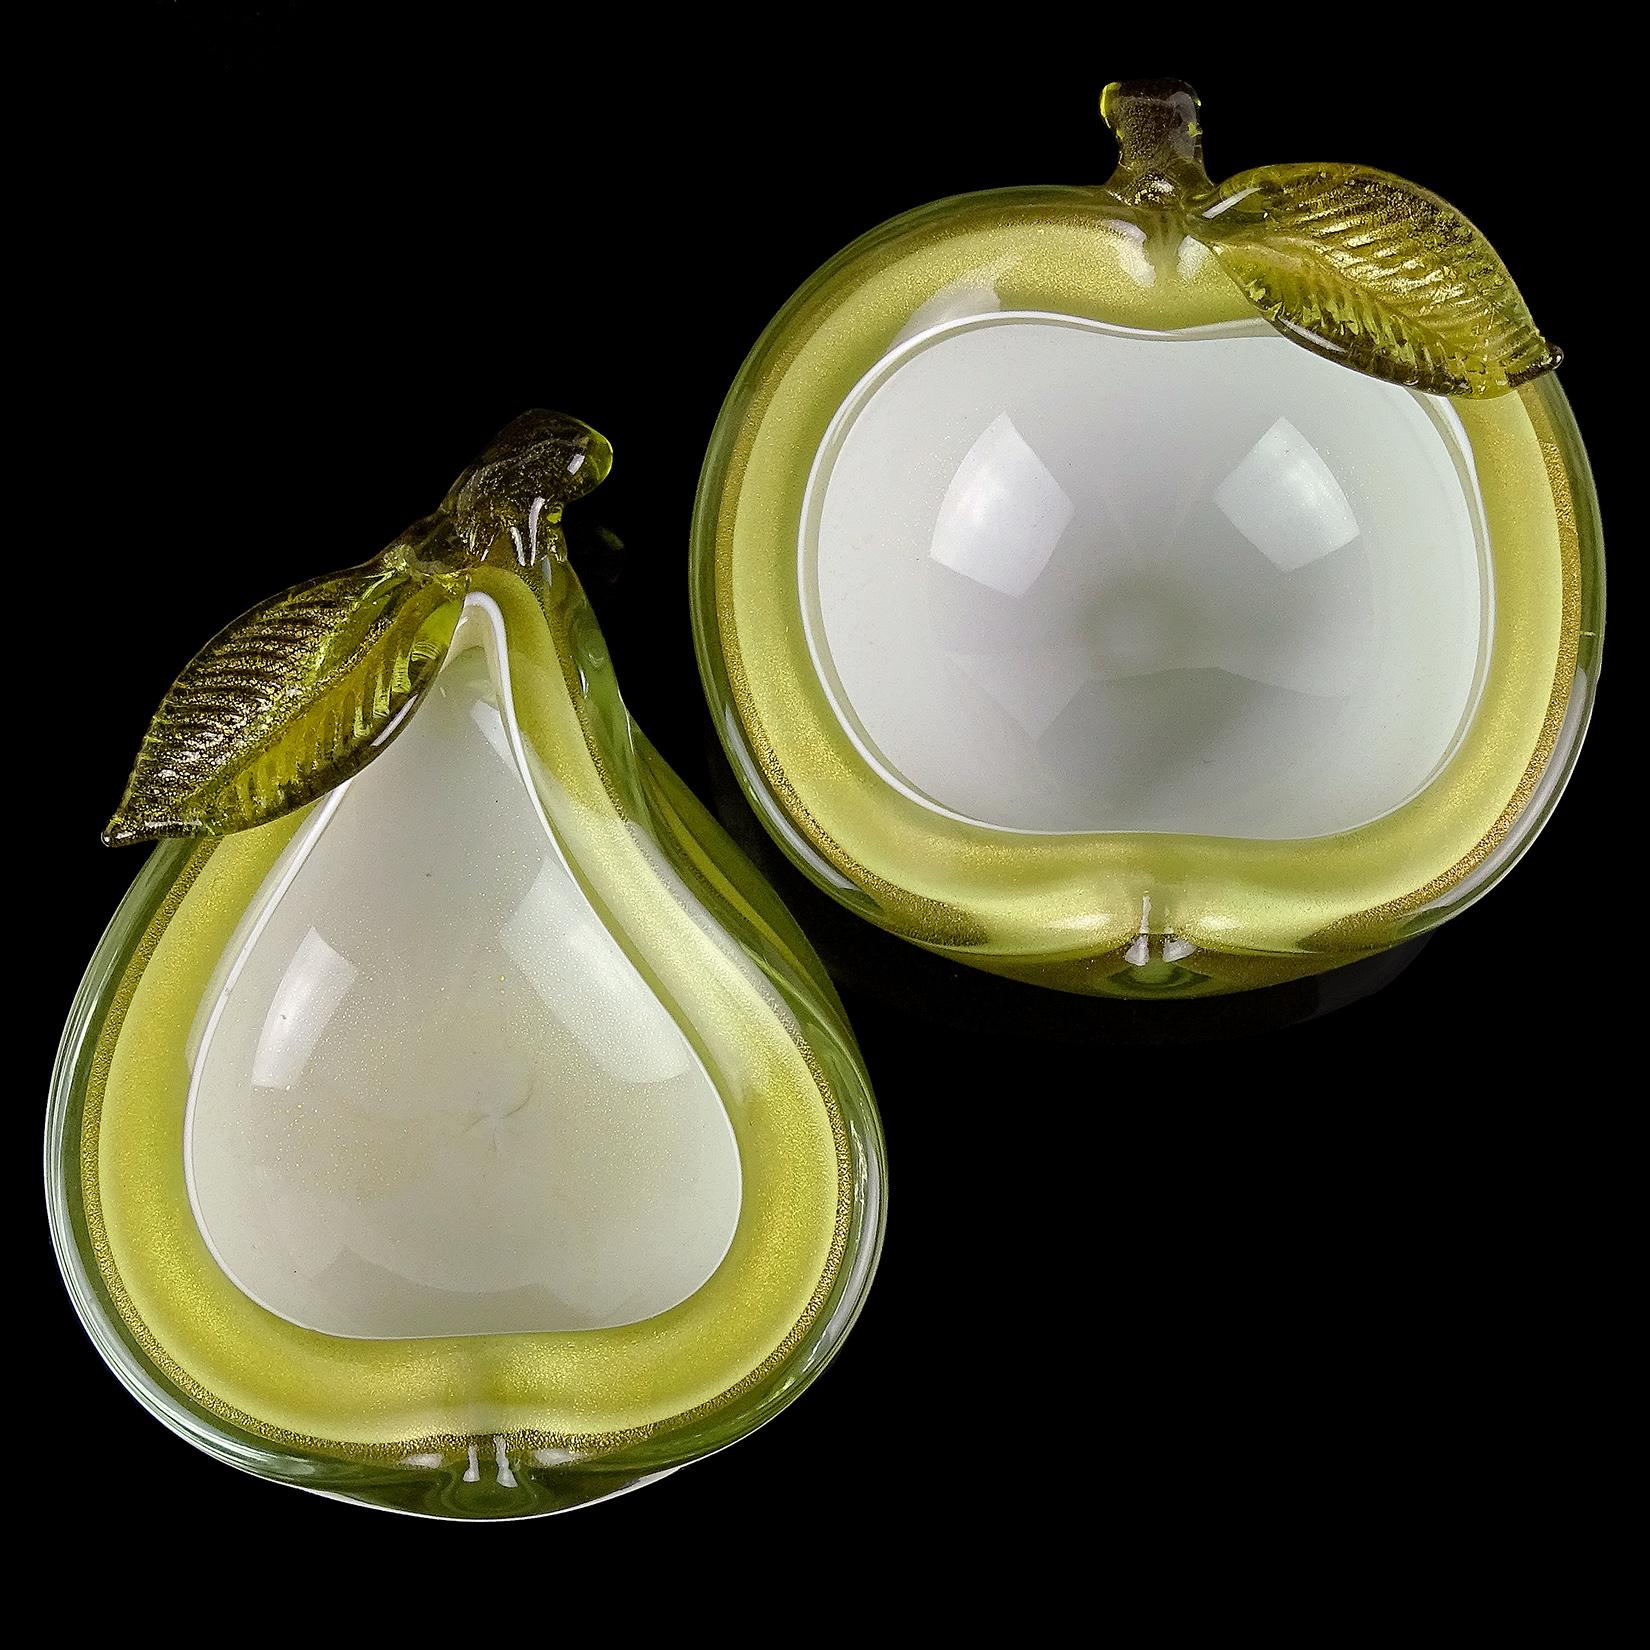 ONLY 1 Set Left! - Beautiful vintage Murano hand blown olive green over white and gold flecks Italian art glass apple and pear shaped bowls. Documented to Master glass artist and designer Alfredo Barbini, circa 1950-1960. Published in his vintage